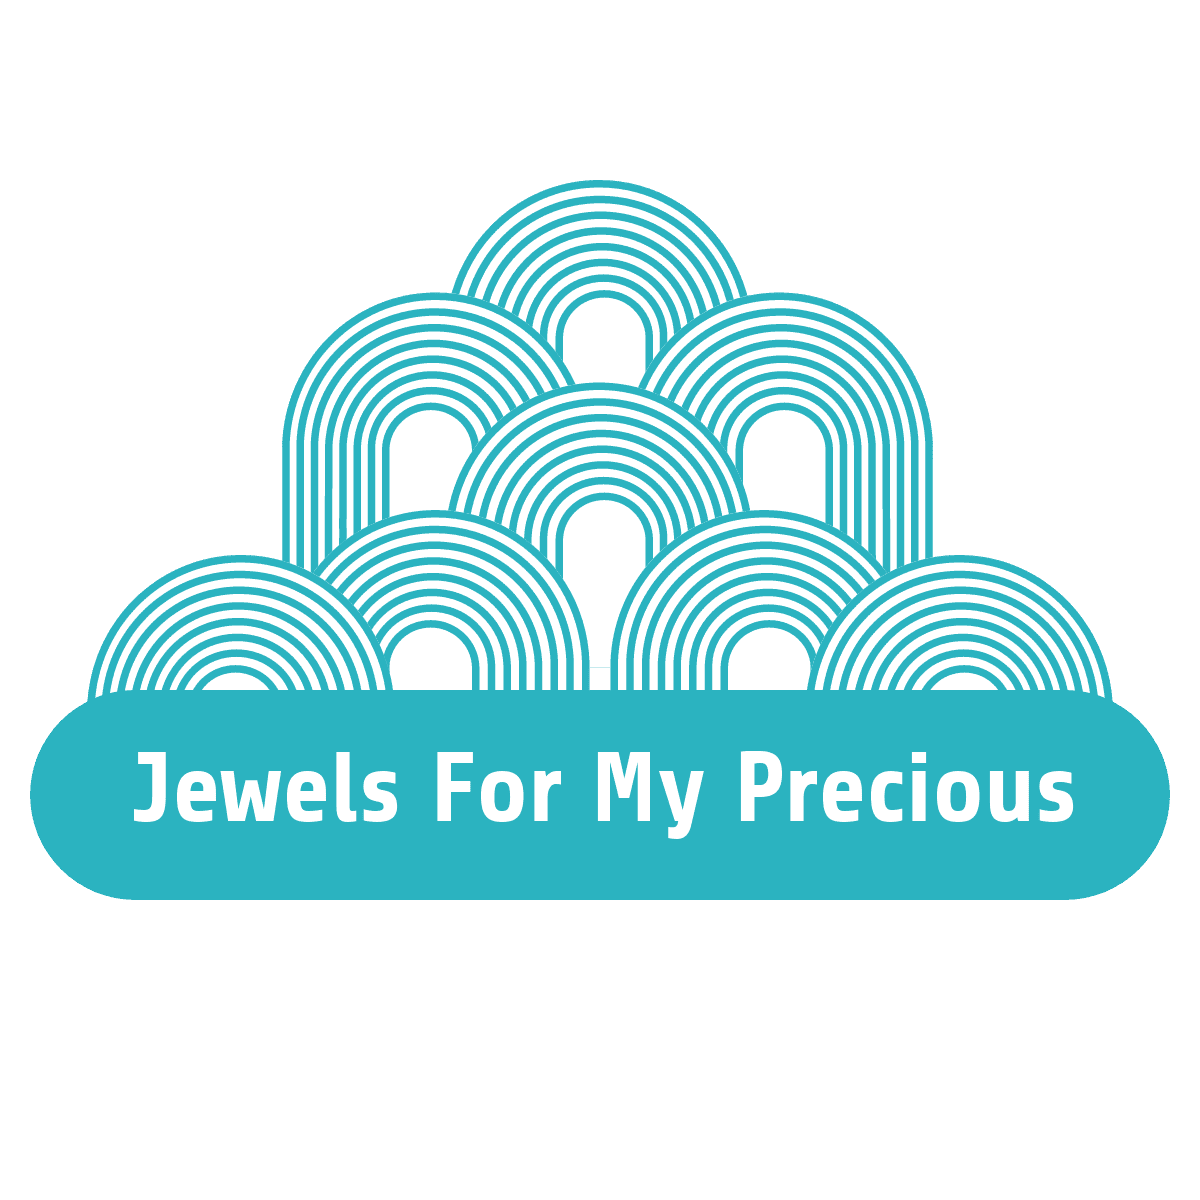 Jewels For My Precious